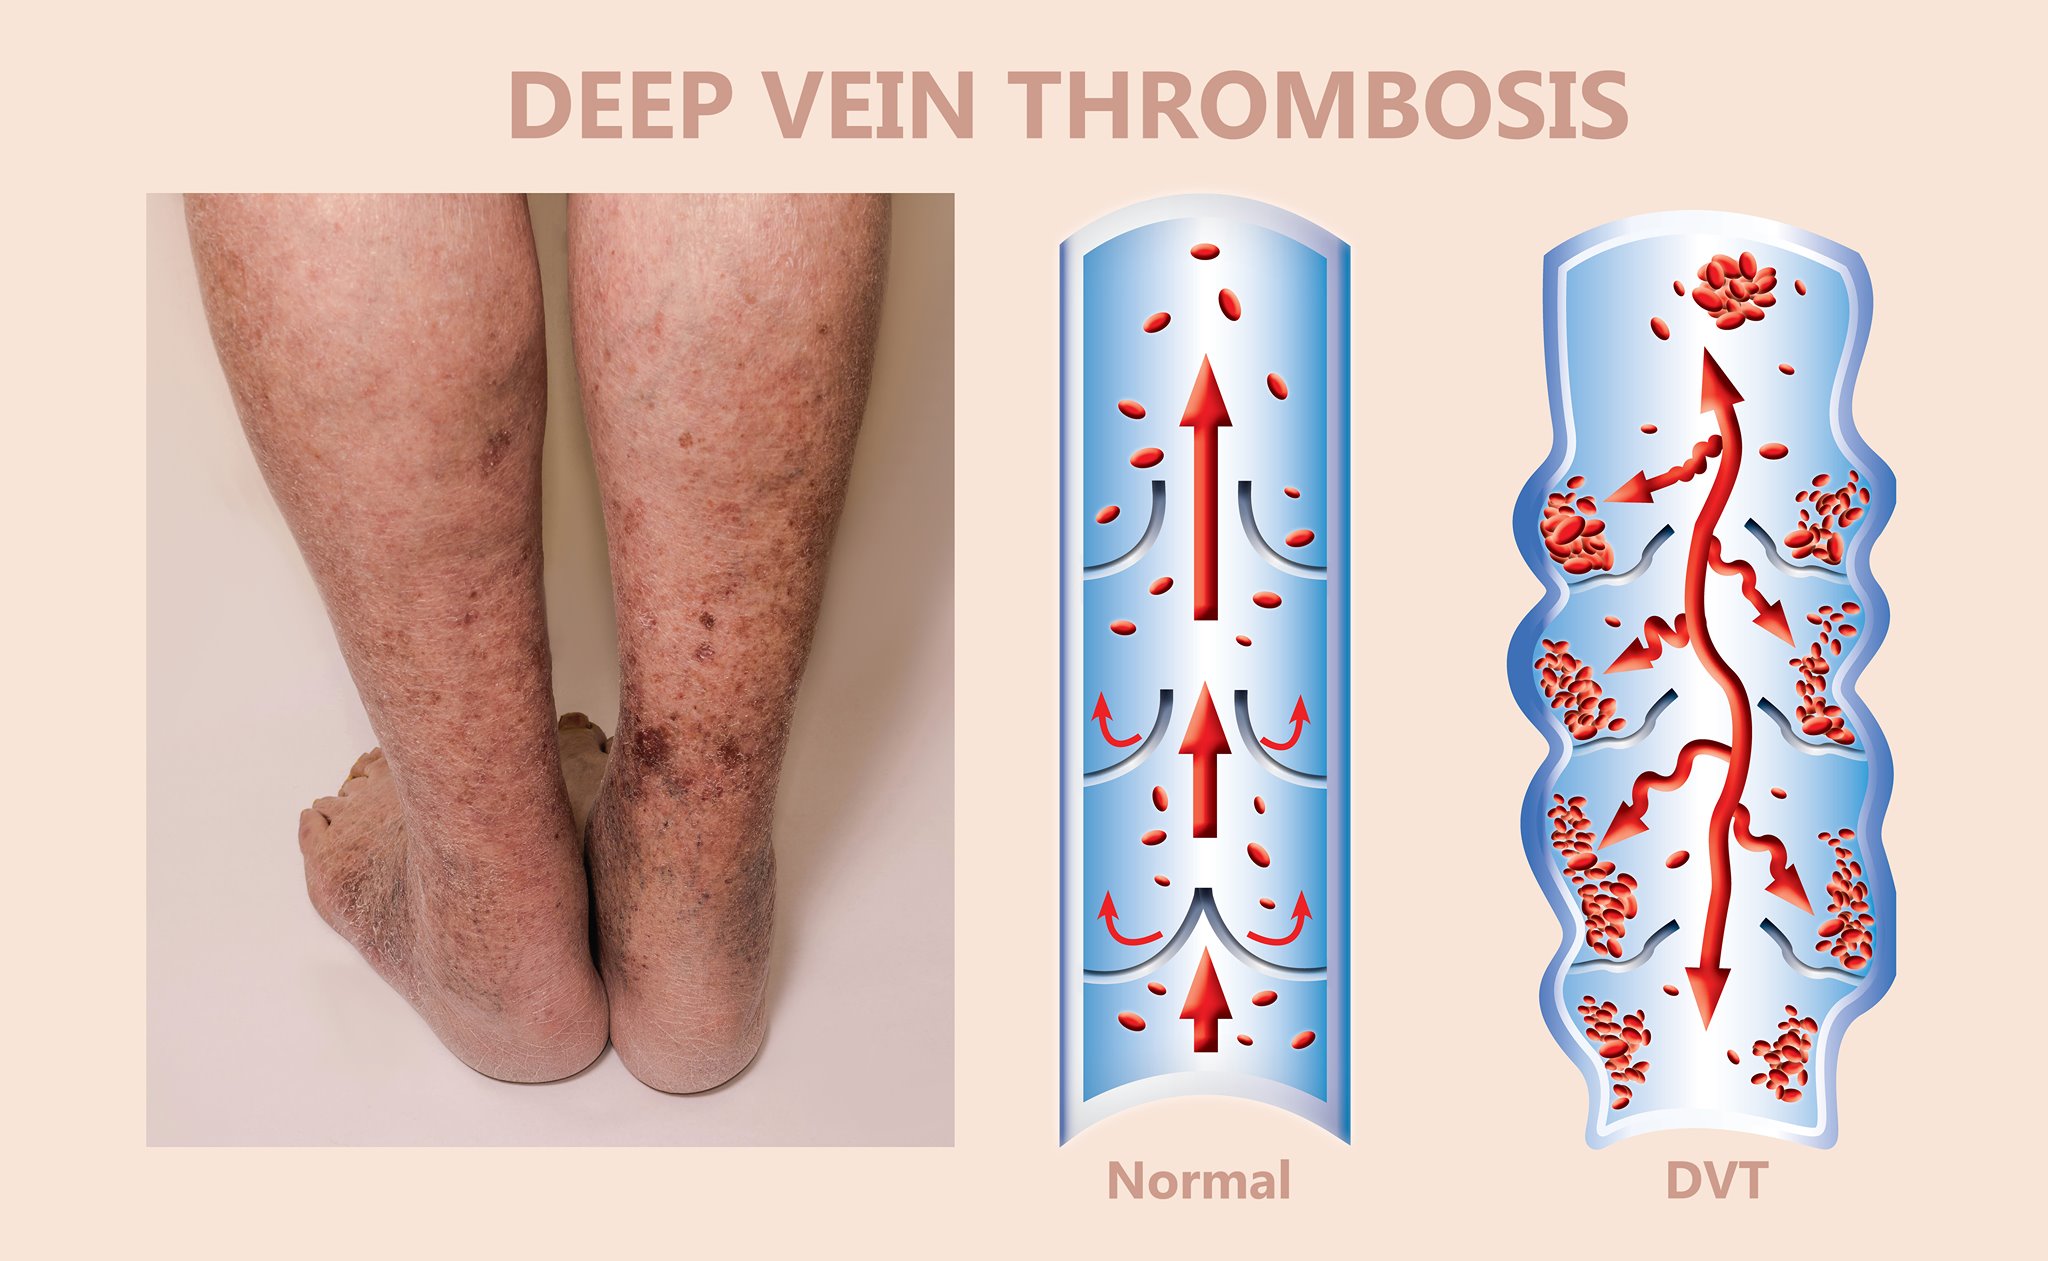 How Do You Know If You Have Deep Vein Thrombosis (DVT)?